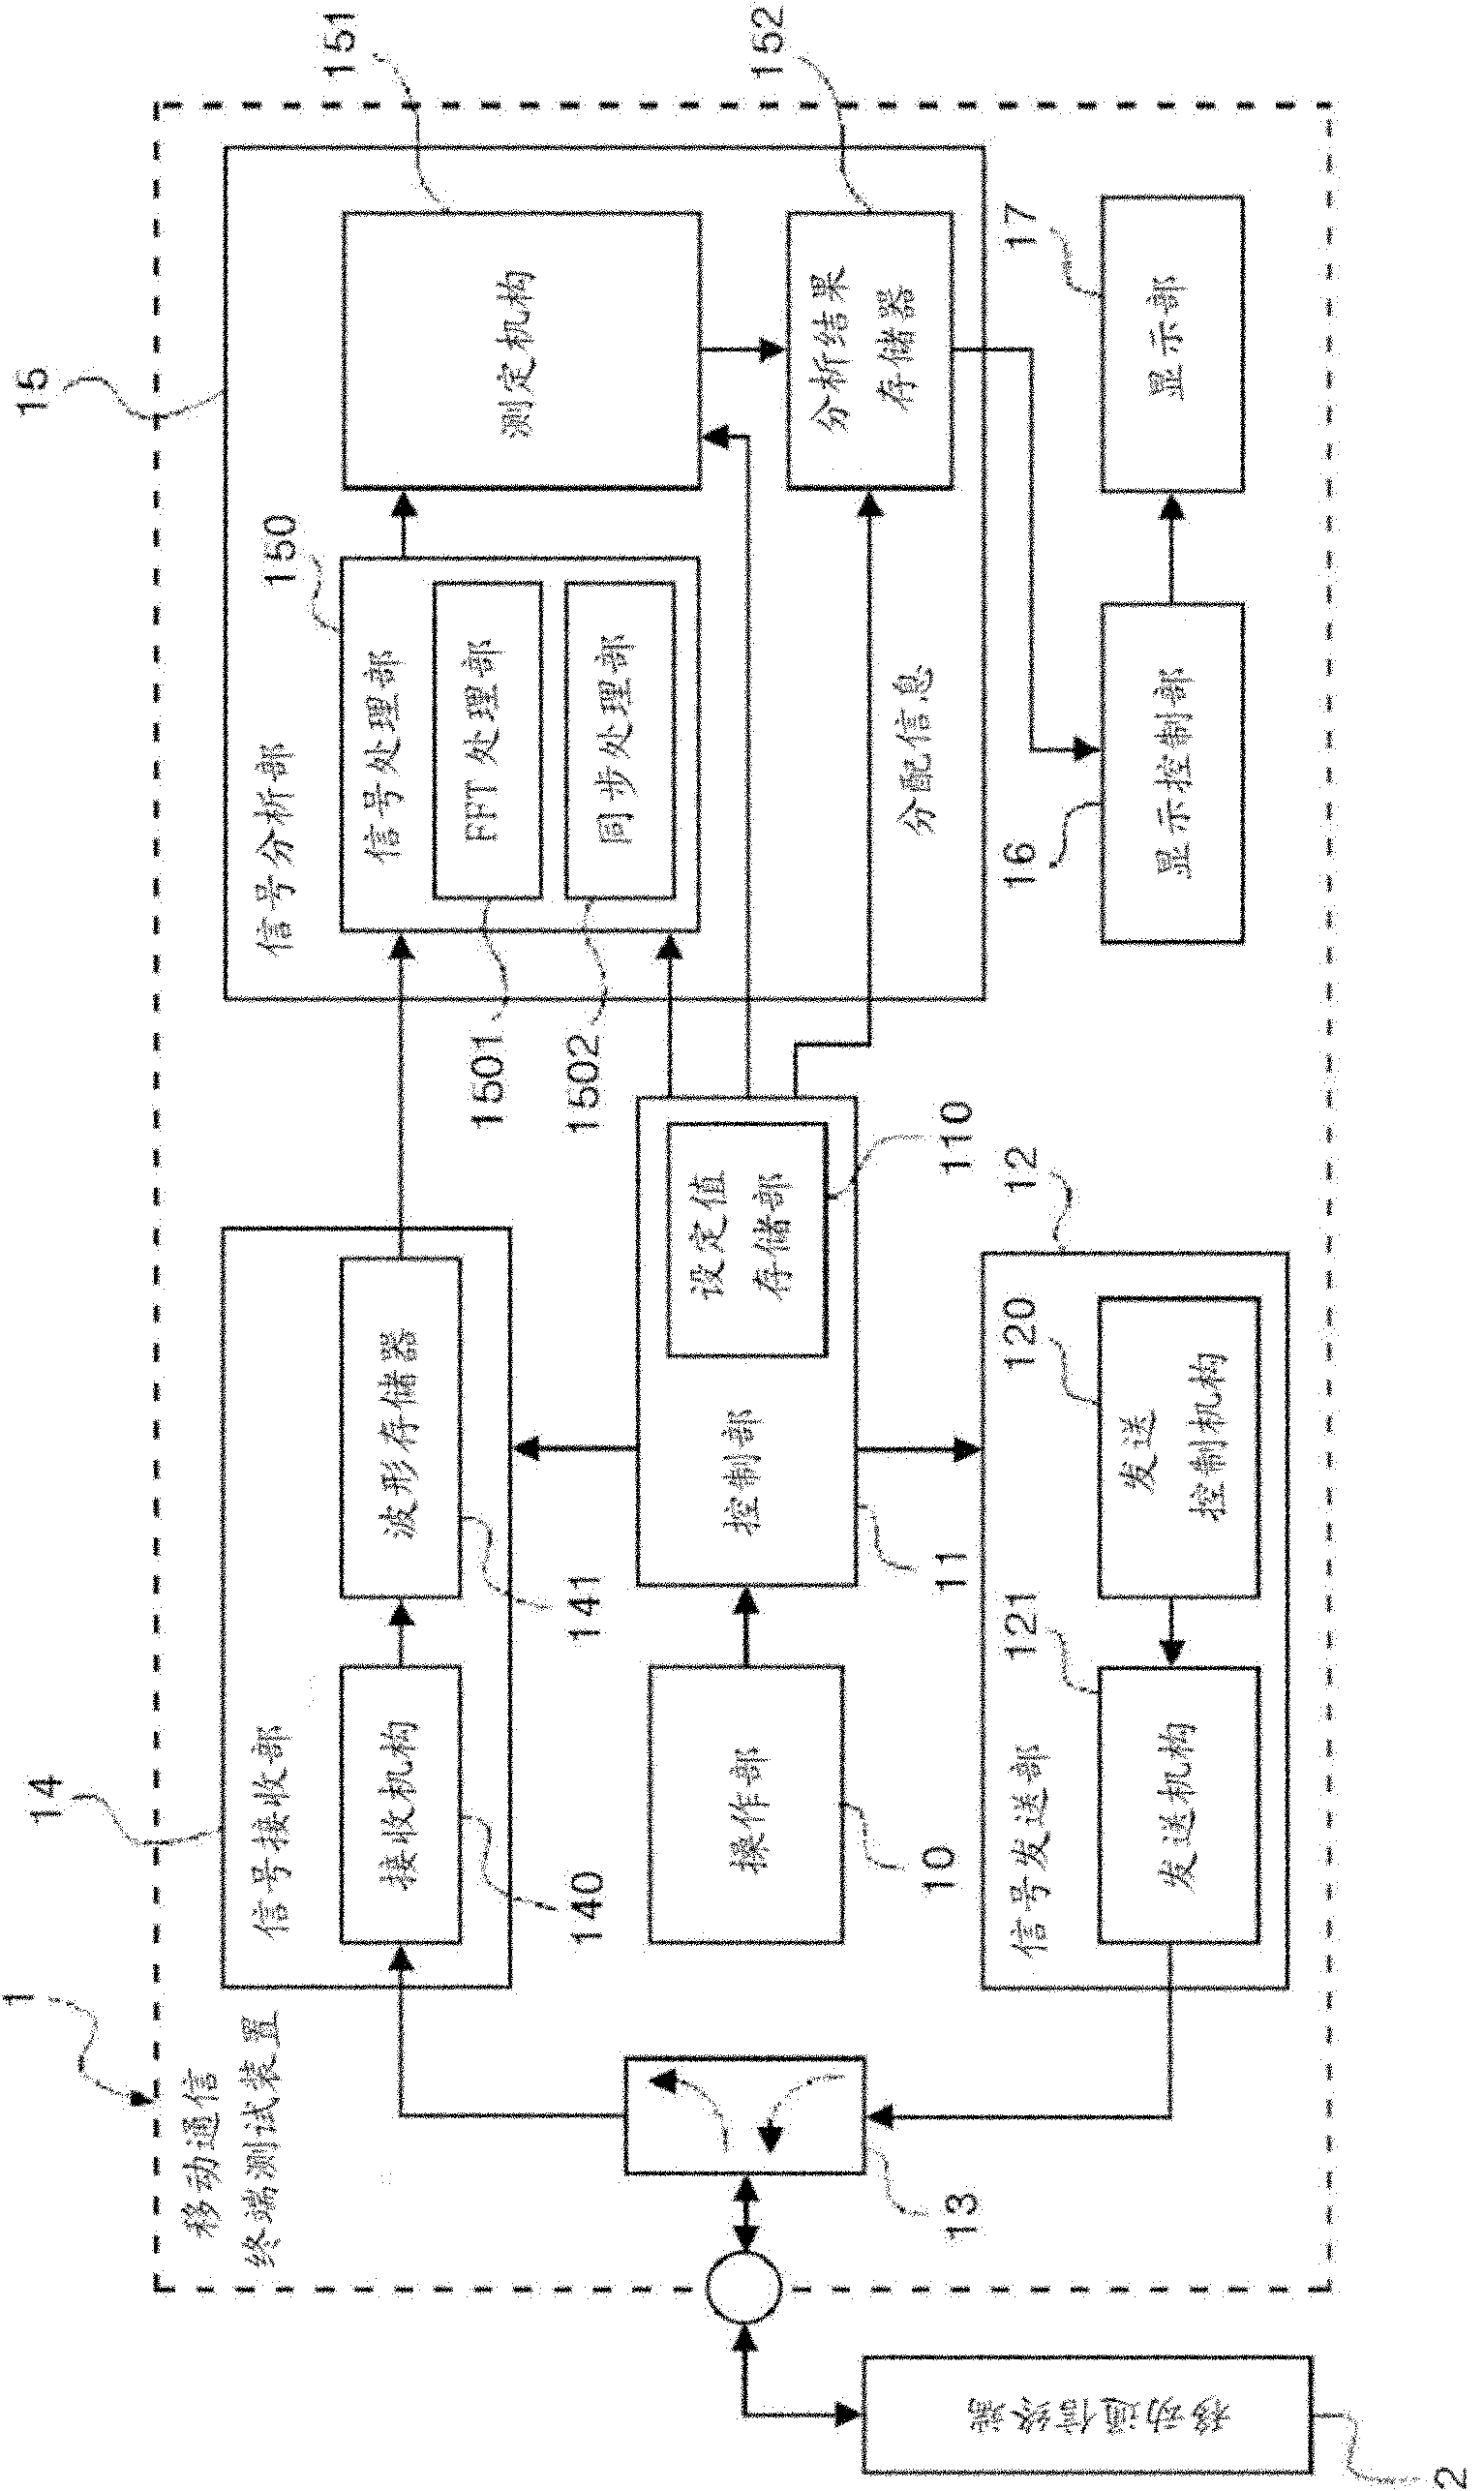 Mobile communication terminal test apparatus and test result display method